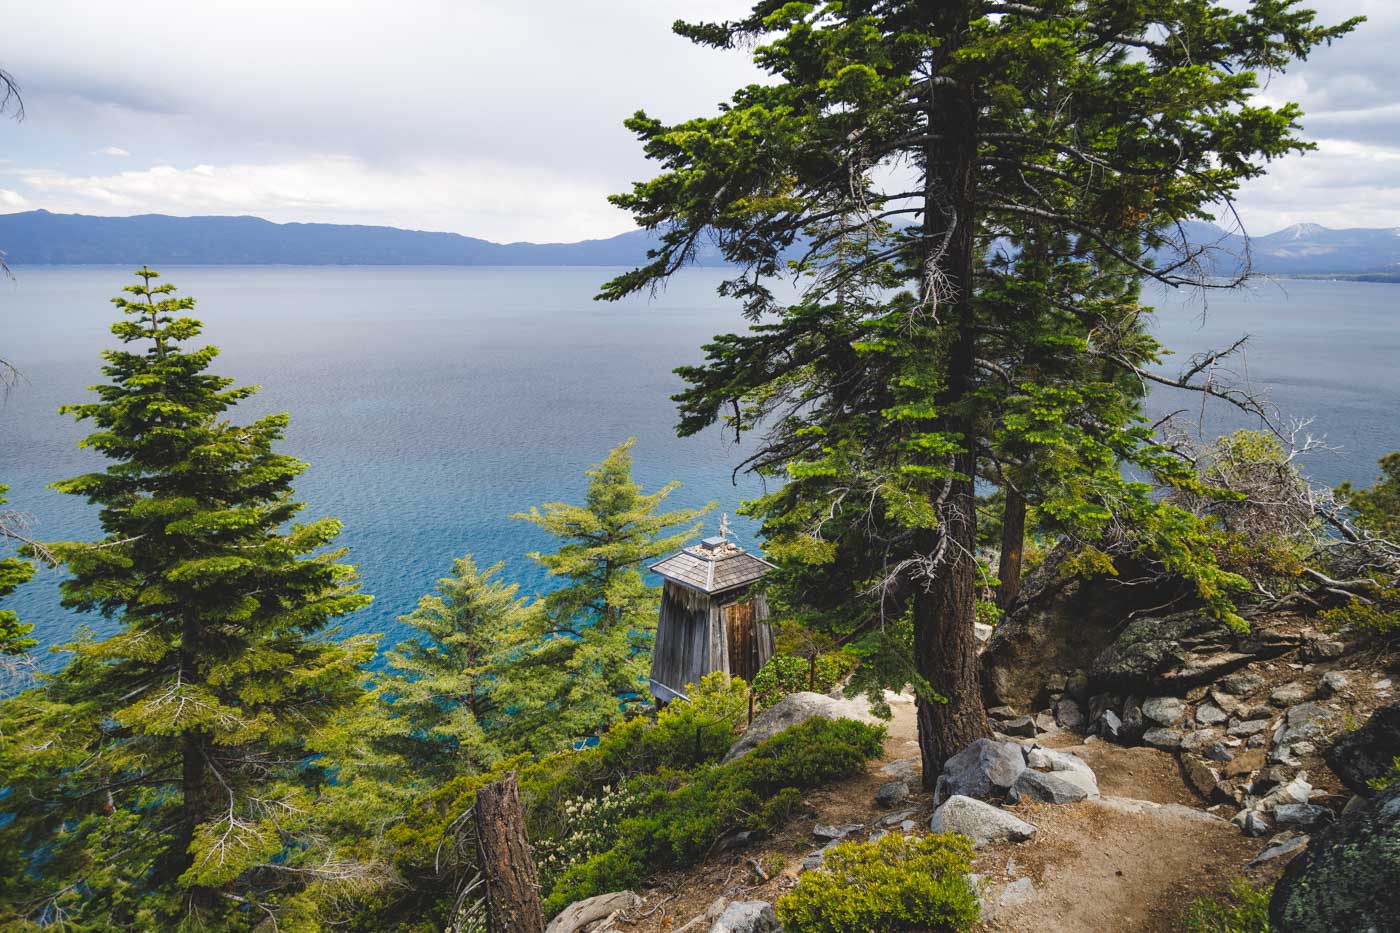 A small wooden antique lighthouse perched on the cliffs along the Rubicon Trail surrounded by trees and the lake.